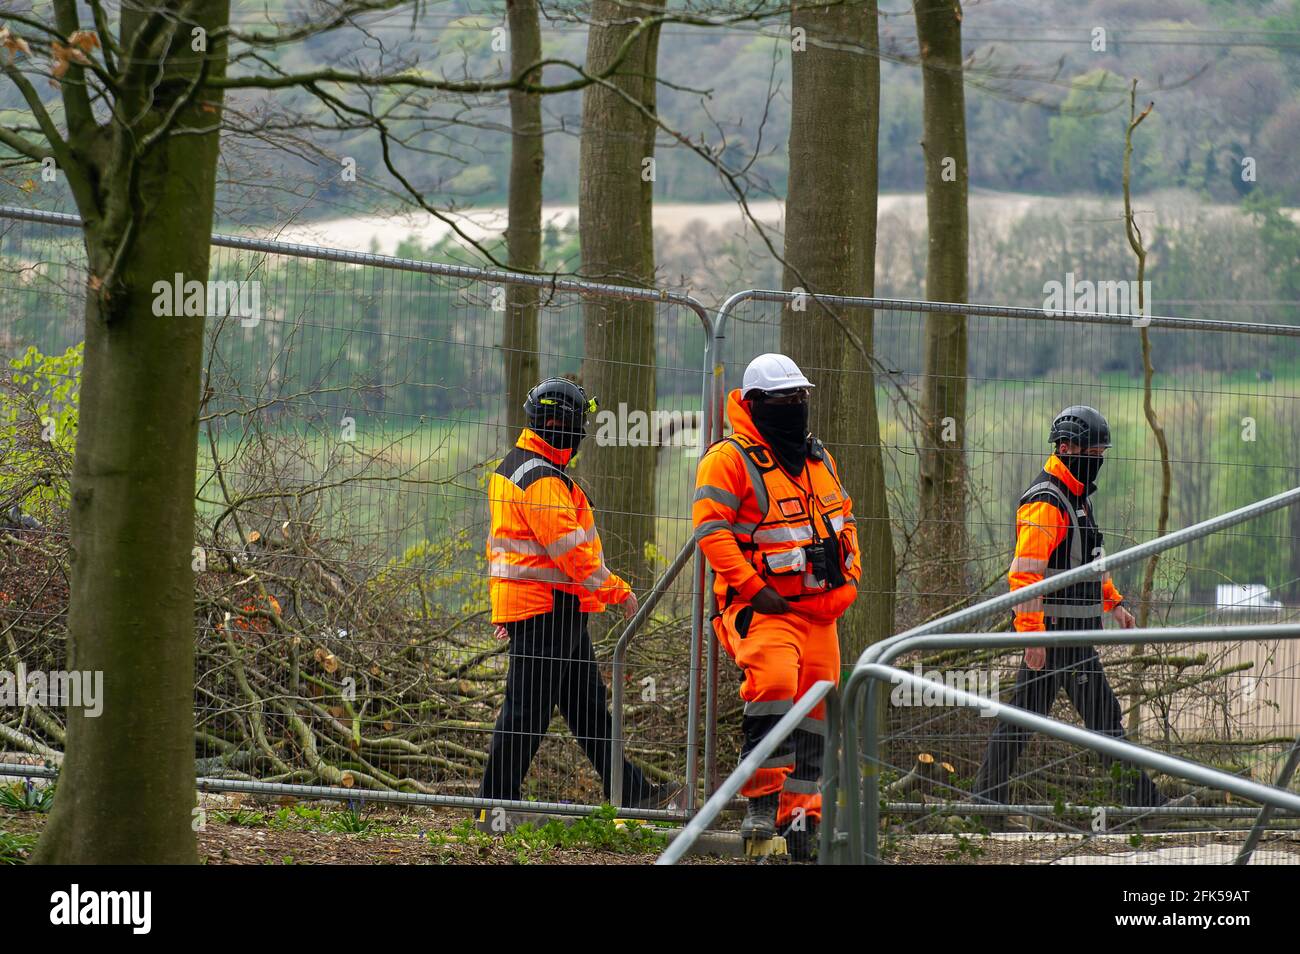 Aylesbury Vale, Buckinghamshire, UK. 27th April, 2021. Balaclava clad HS2 security in the woods. HS2 were back with their chainsaws again today in Jones Hill Wood. Following legal action taken against Natural England by Earth Protector Mark Kier HS2 were ordered to stop felling trees at Jones Hill Wood on 16th April 2021. HS2 have appealled and have now been given permission to start tree felling again despite it being the bird nesting season and that rare Barbastelle bats are known to roost in the woods.  The High Speed Rail 2 from London to Birmingham is carving a huge scar across Buckingham Stock Photo